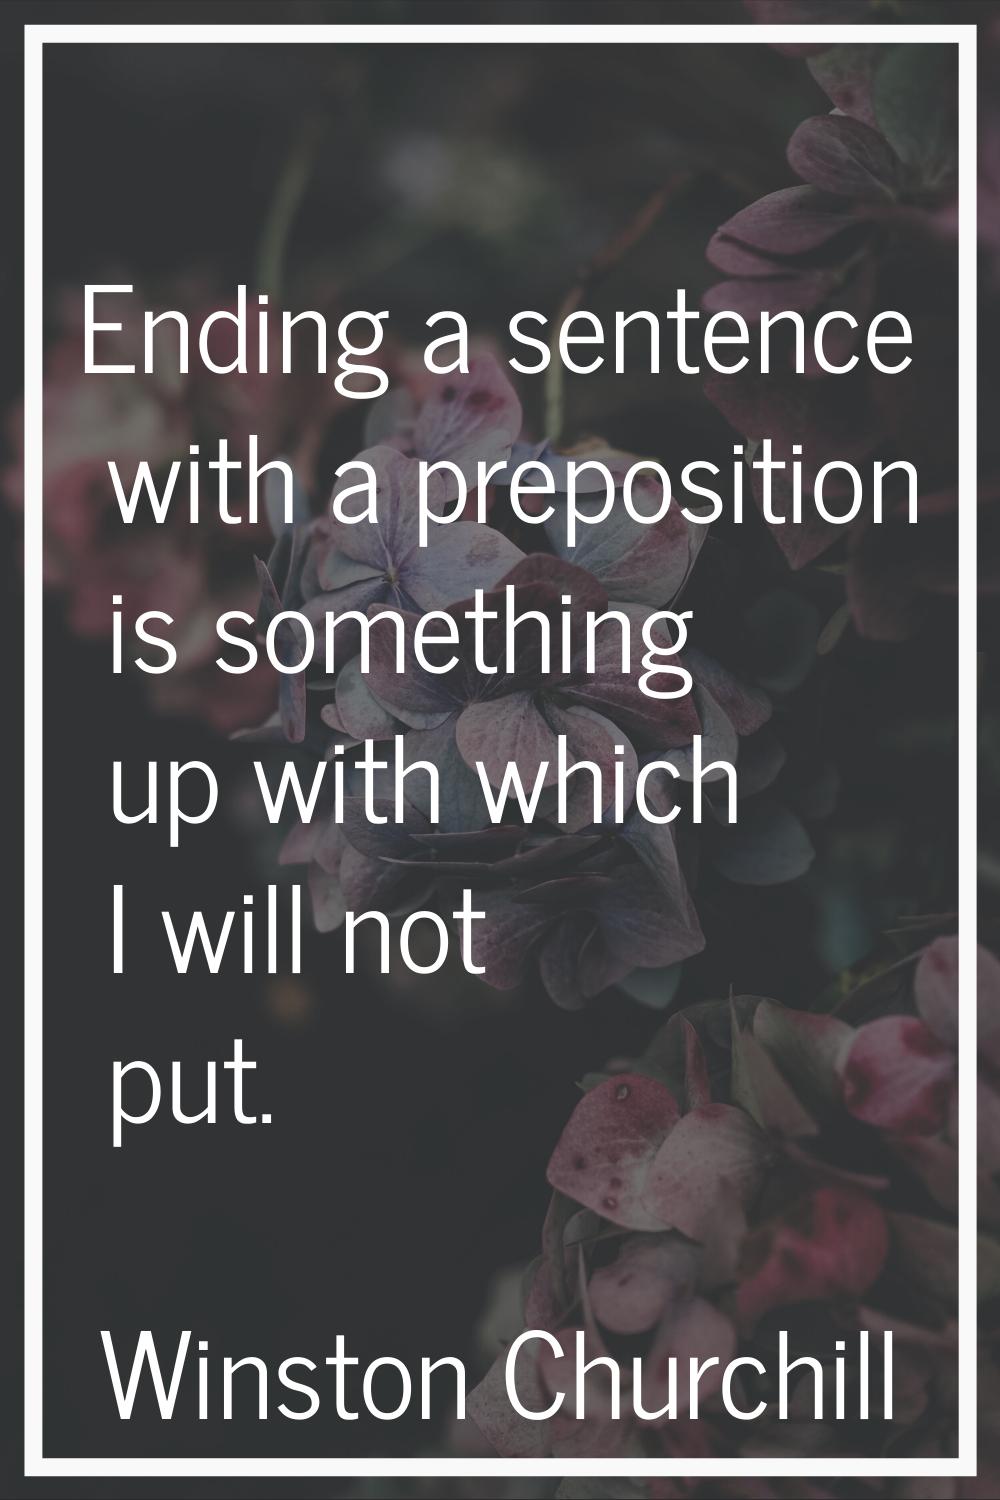 Ending a sentence with a preposition is something up with which I will not put.